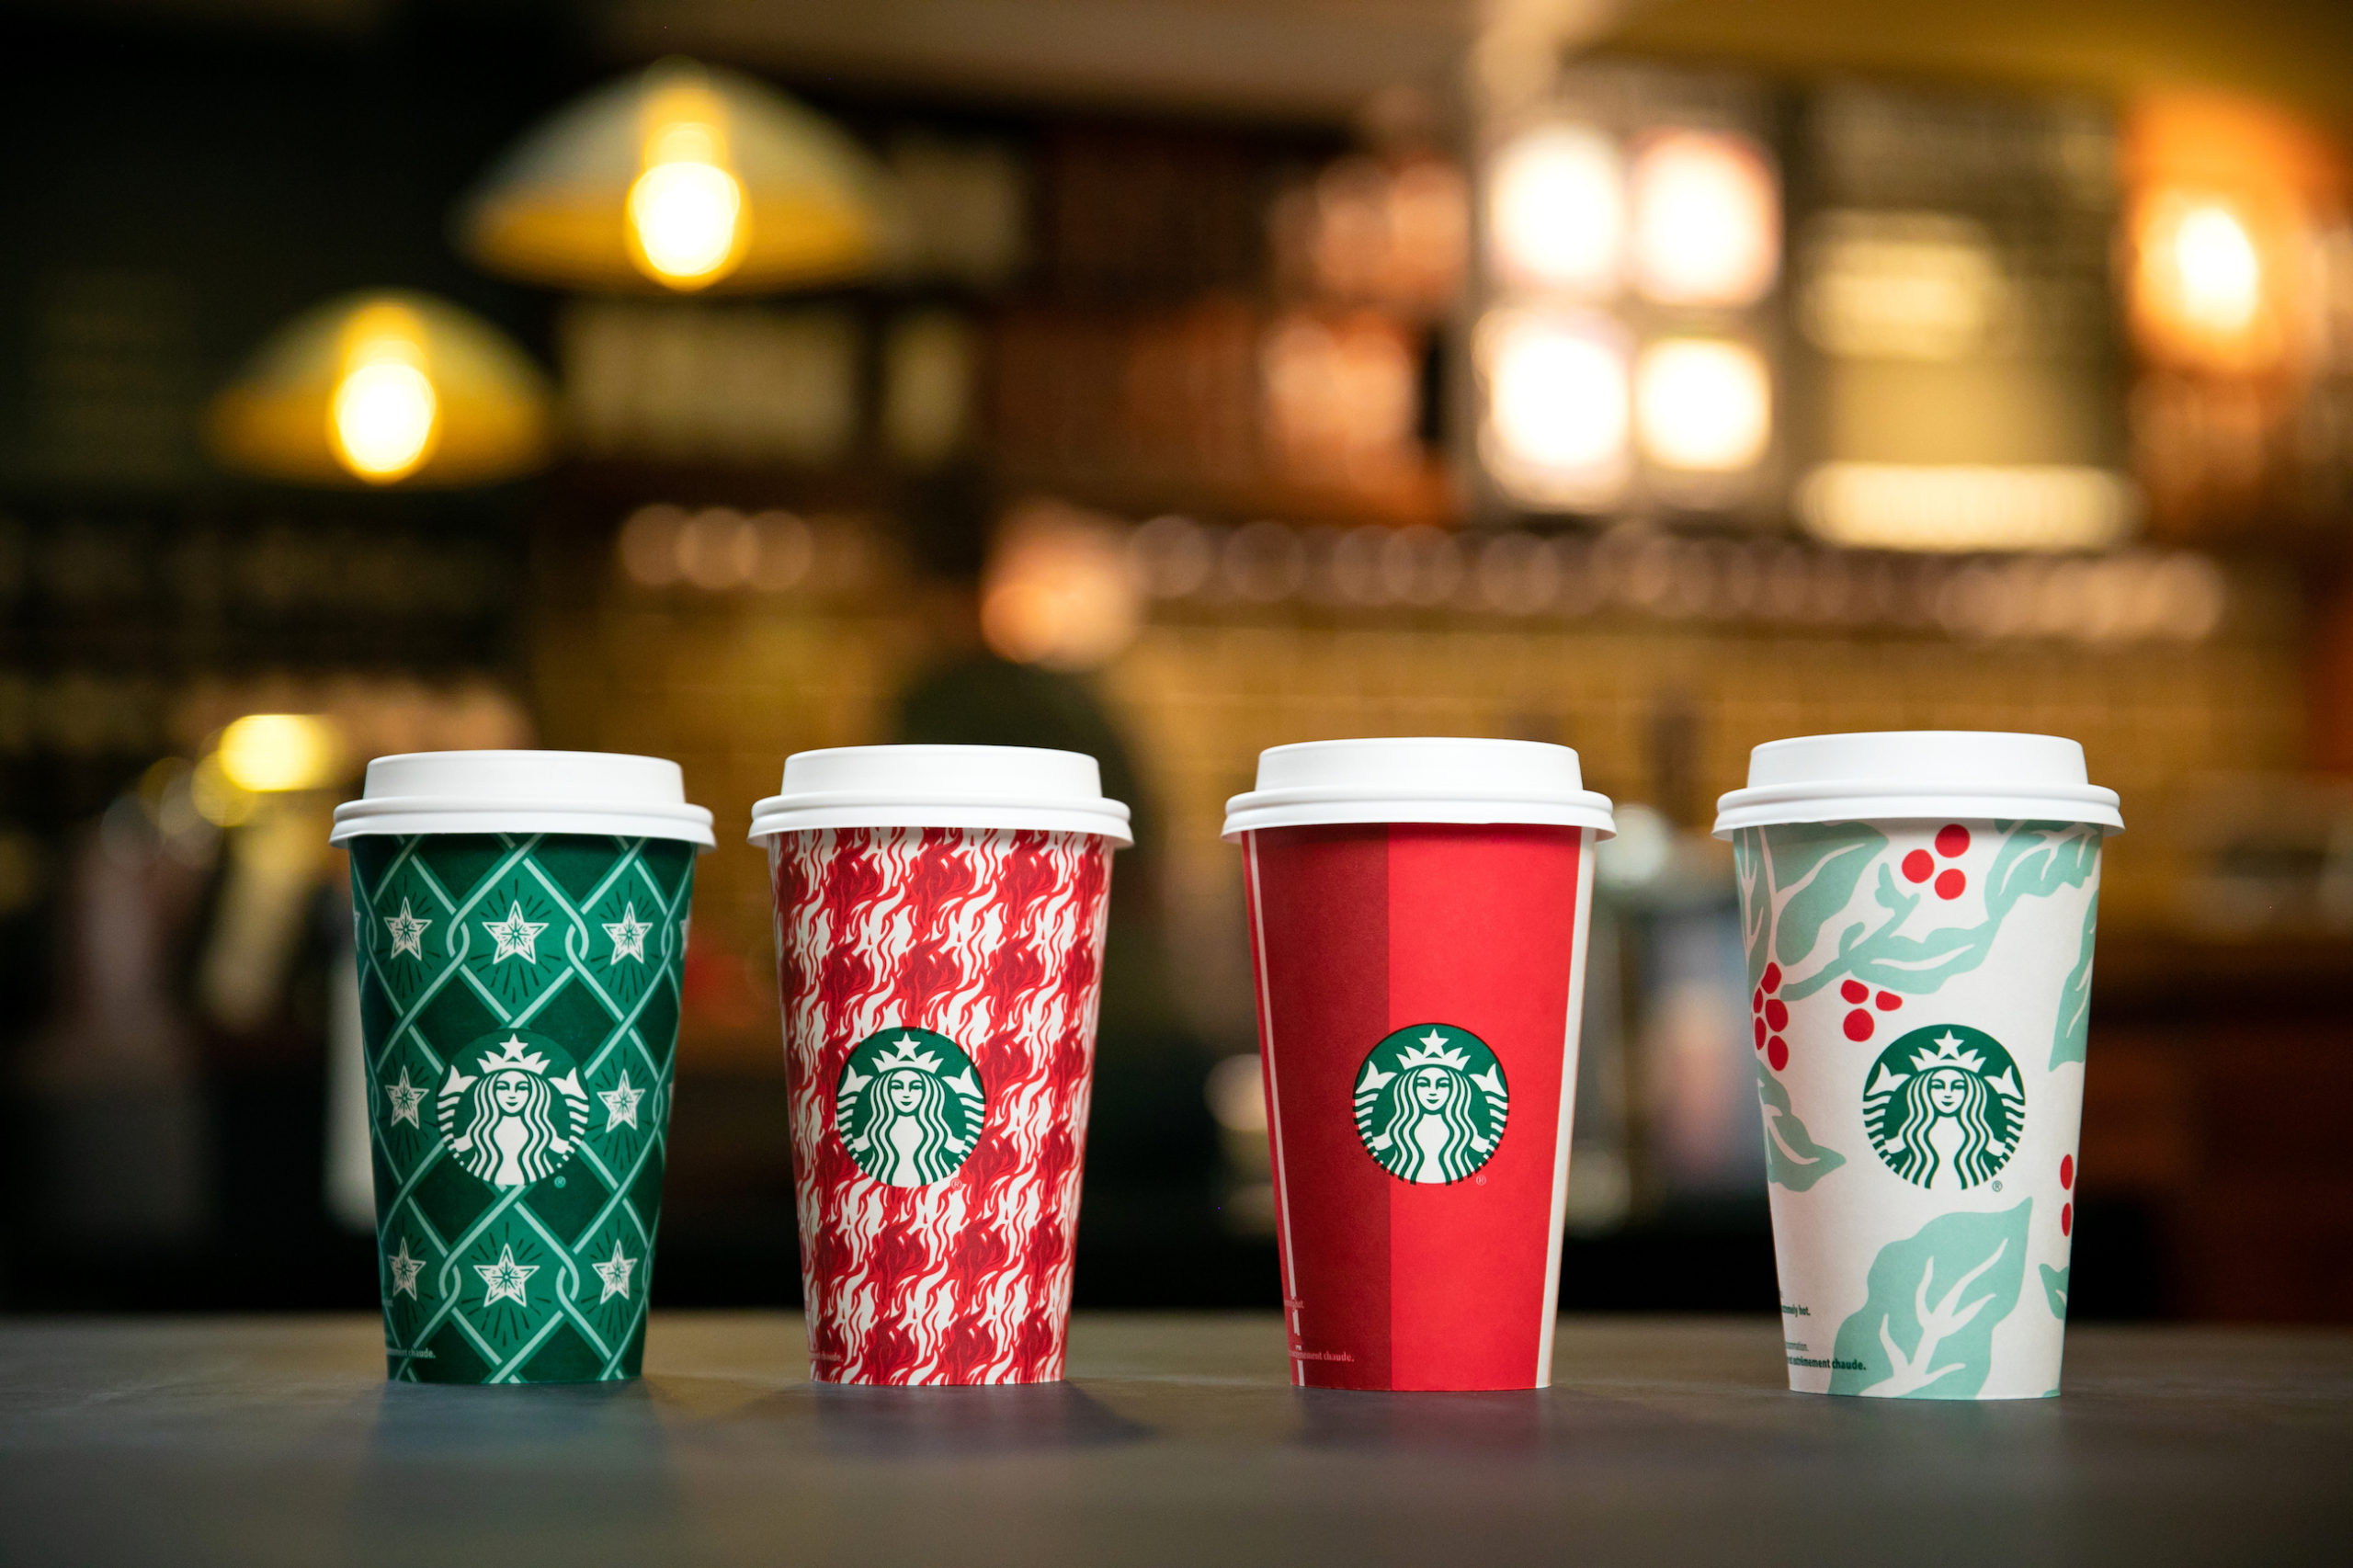 Starbucks is brewing up some holiday magic.